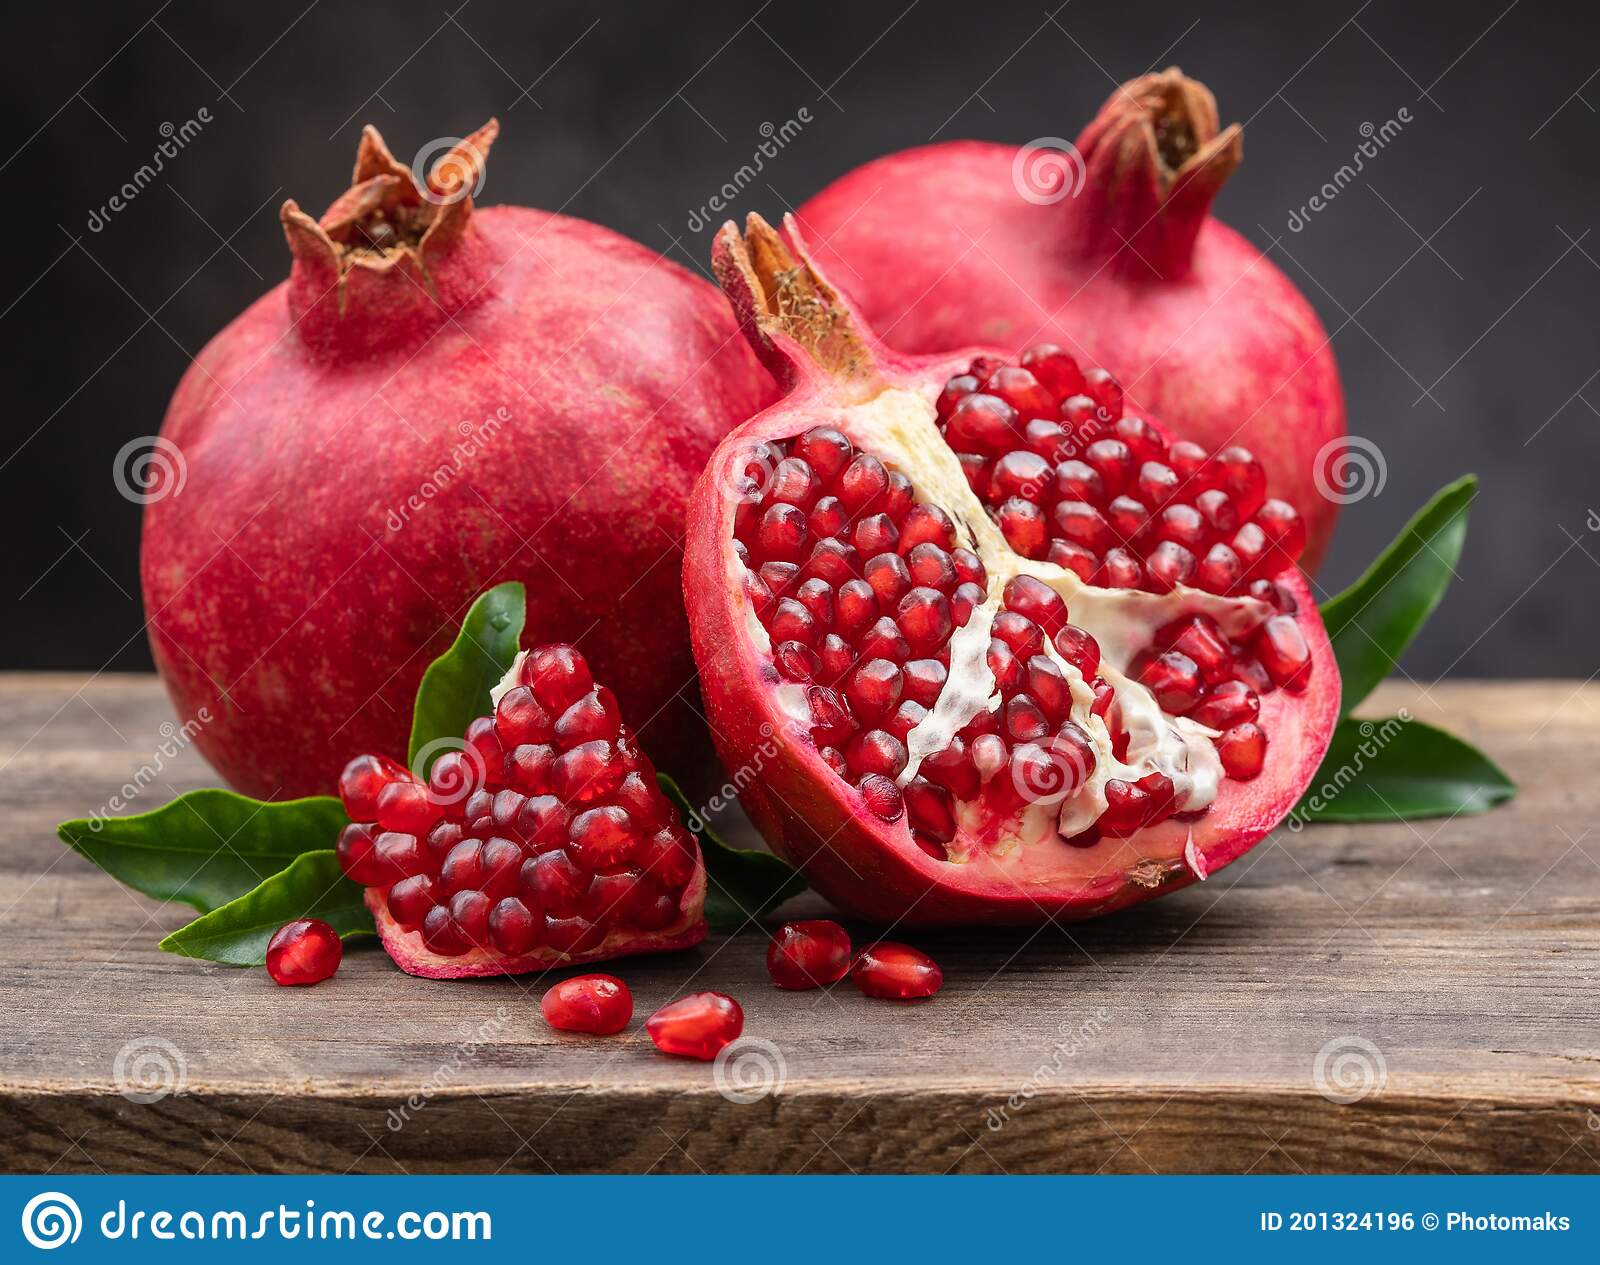 Download Picture Of Pomegranate Fruit Nomer 19